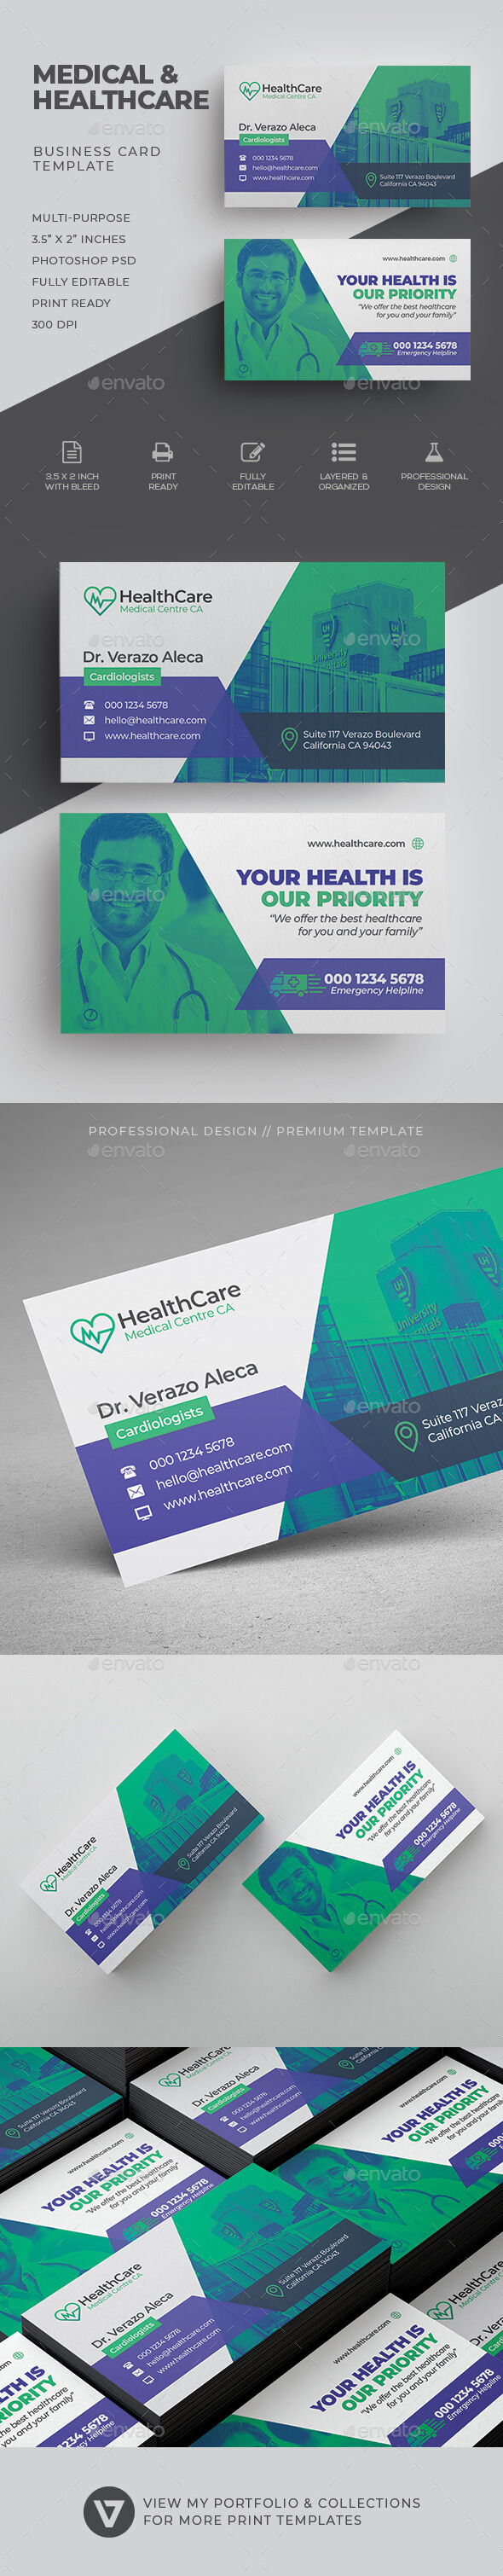 Business Card Templates & Designs From Graphicriver In Medical Business Cards Templates Free